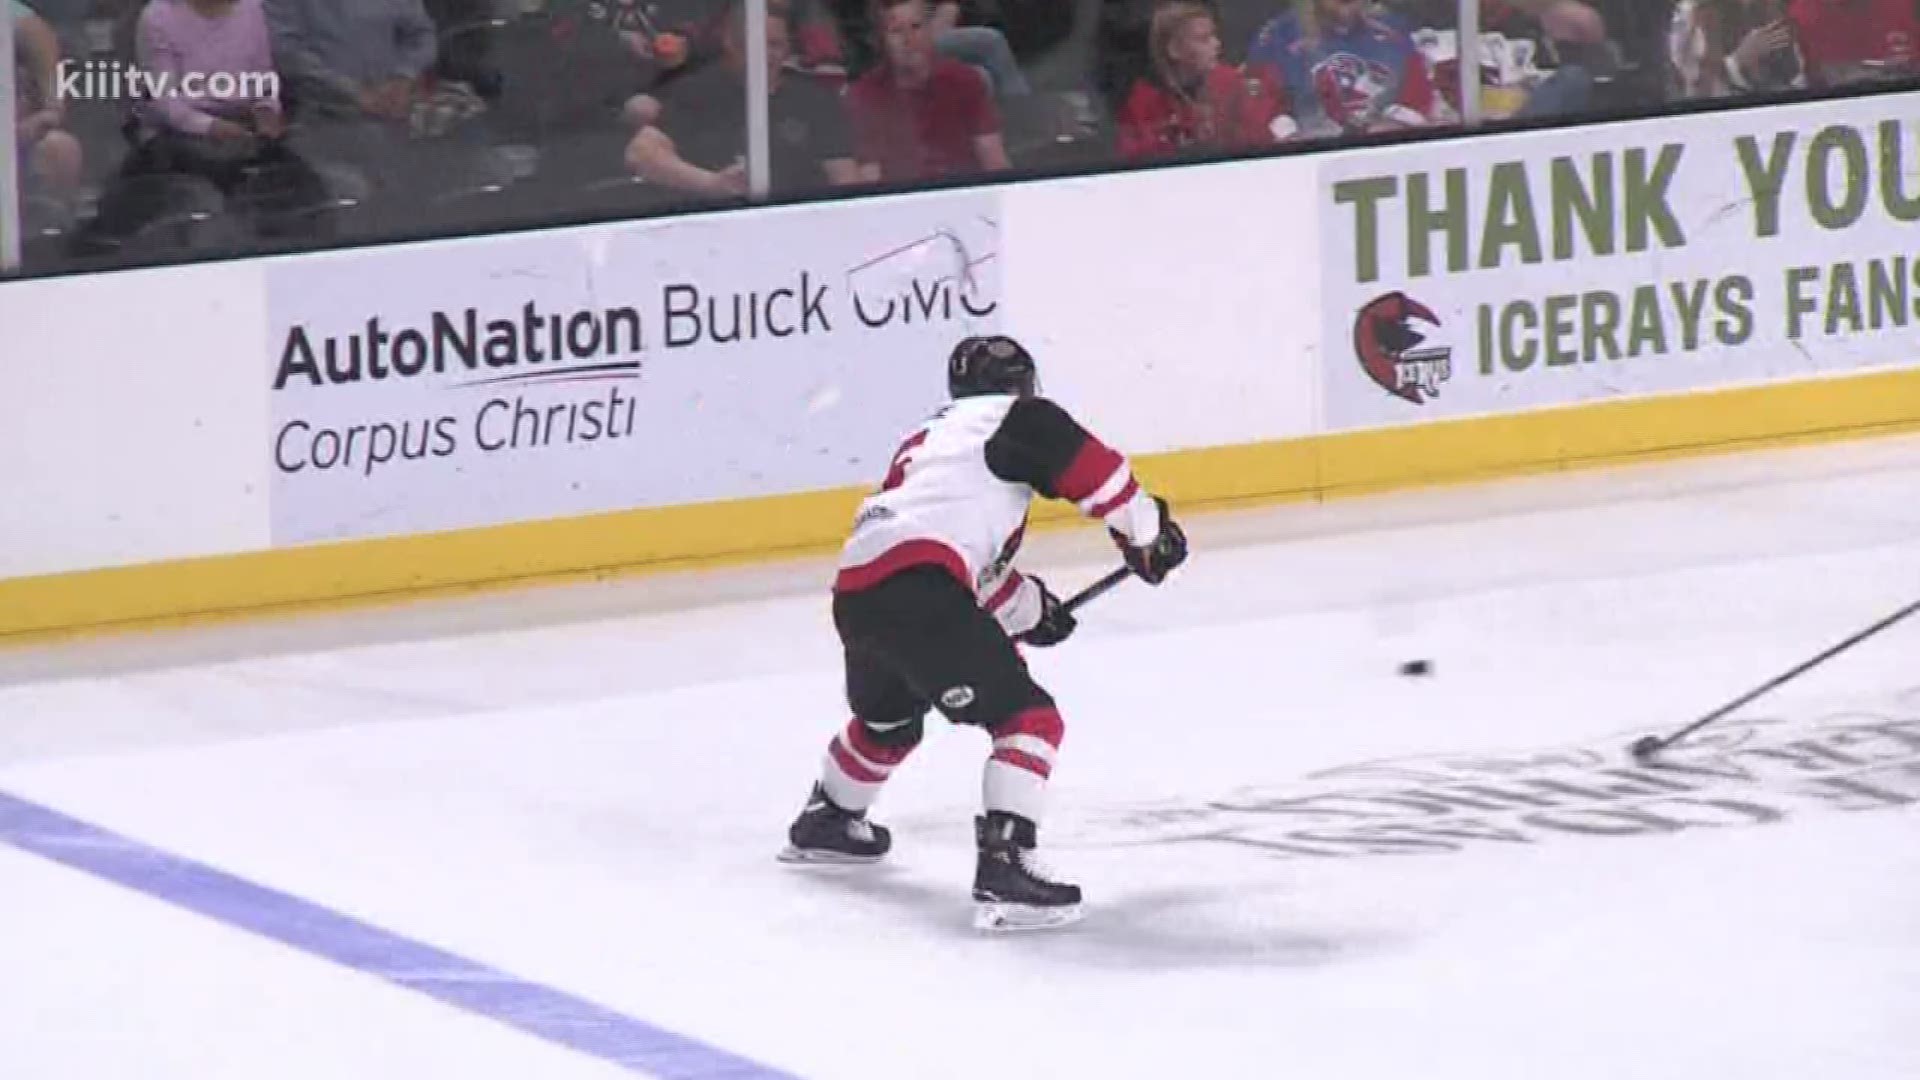 The IceRays overcame two separate deficits to force OT, but Amarillo got their first win of the series with the 4-3 victory Thursday. Corpus Christi now holds a 2-1 series lead.